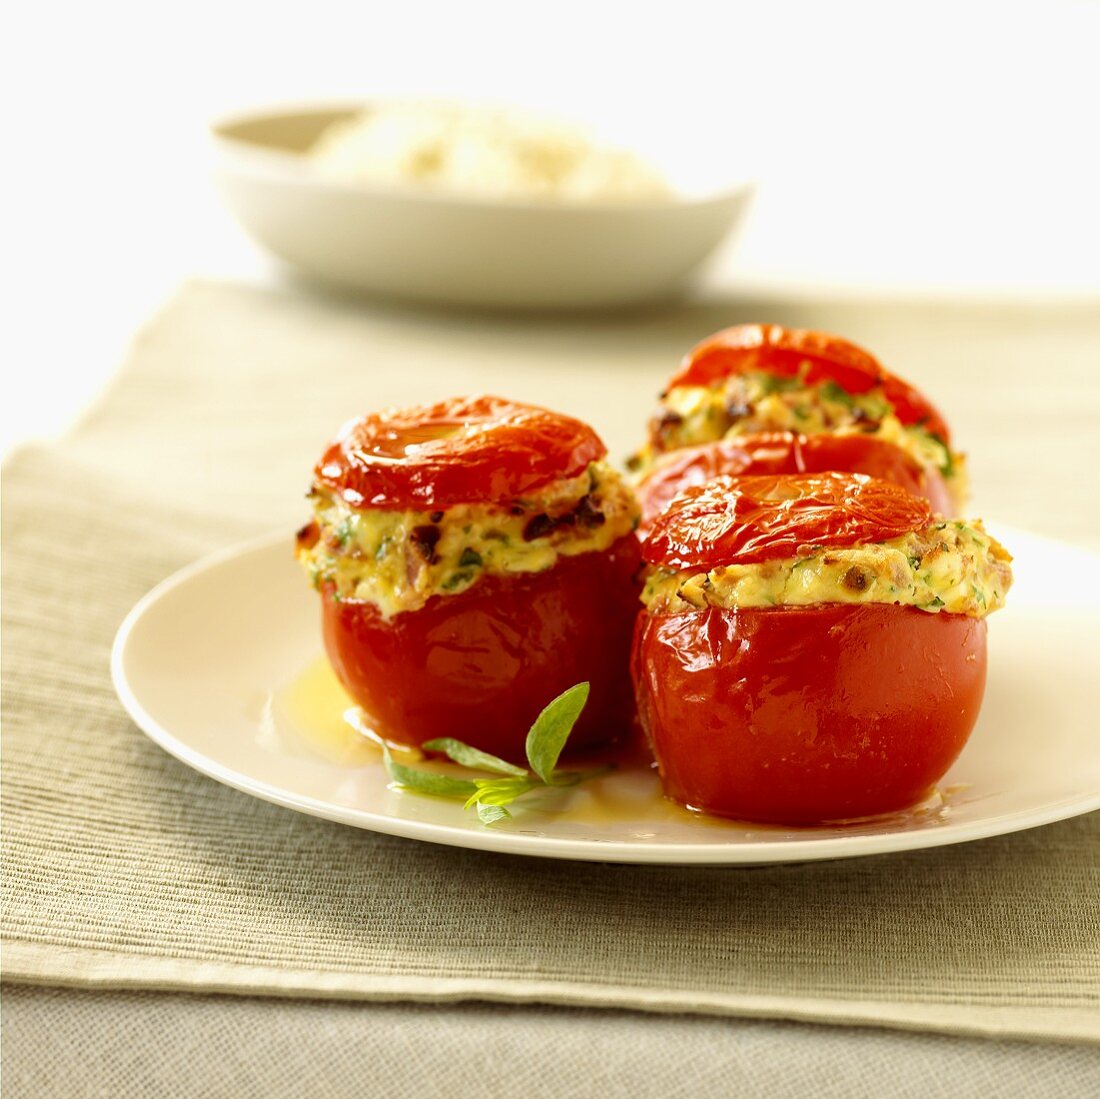 Three tomatoes stuffed with cheese, bacon and leeks